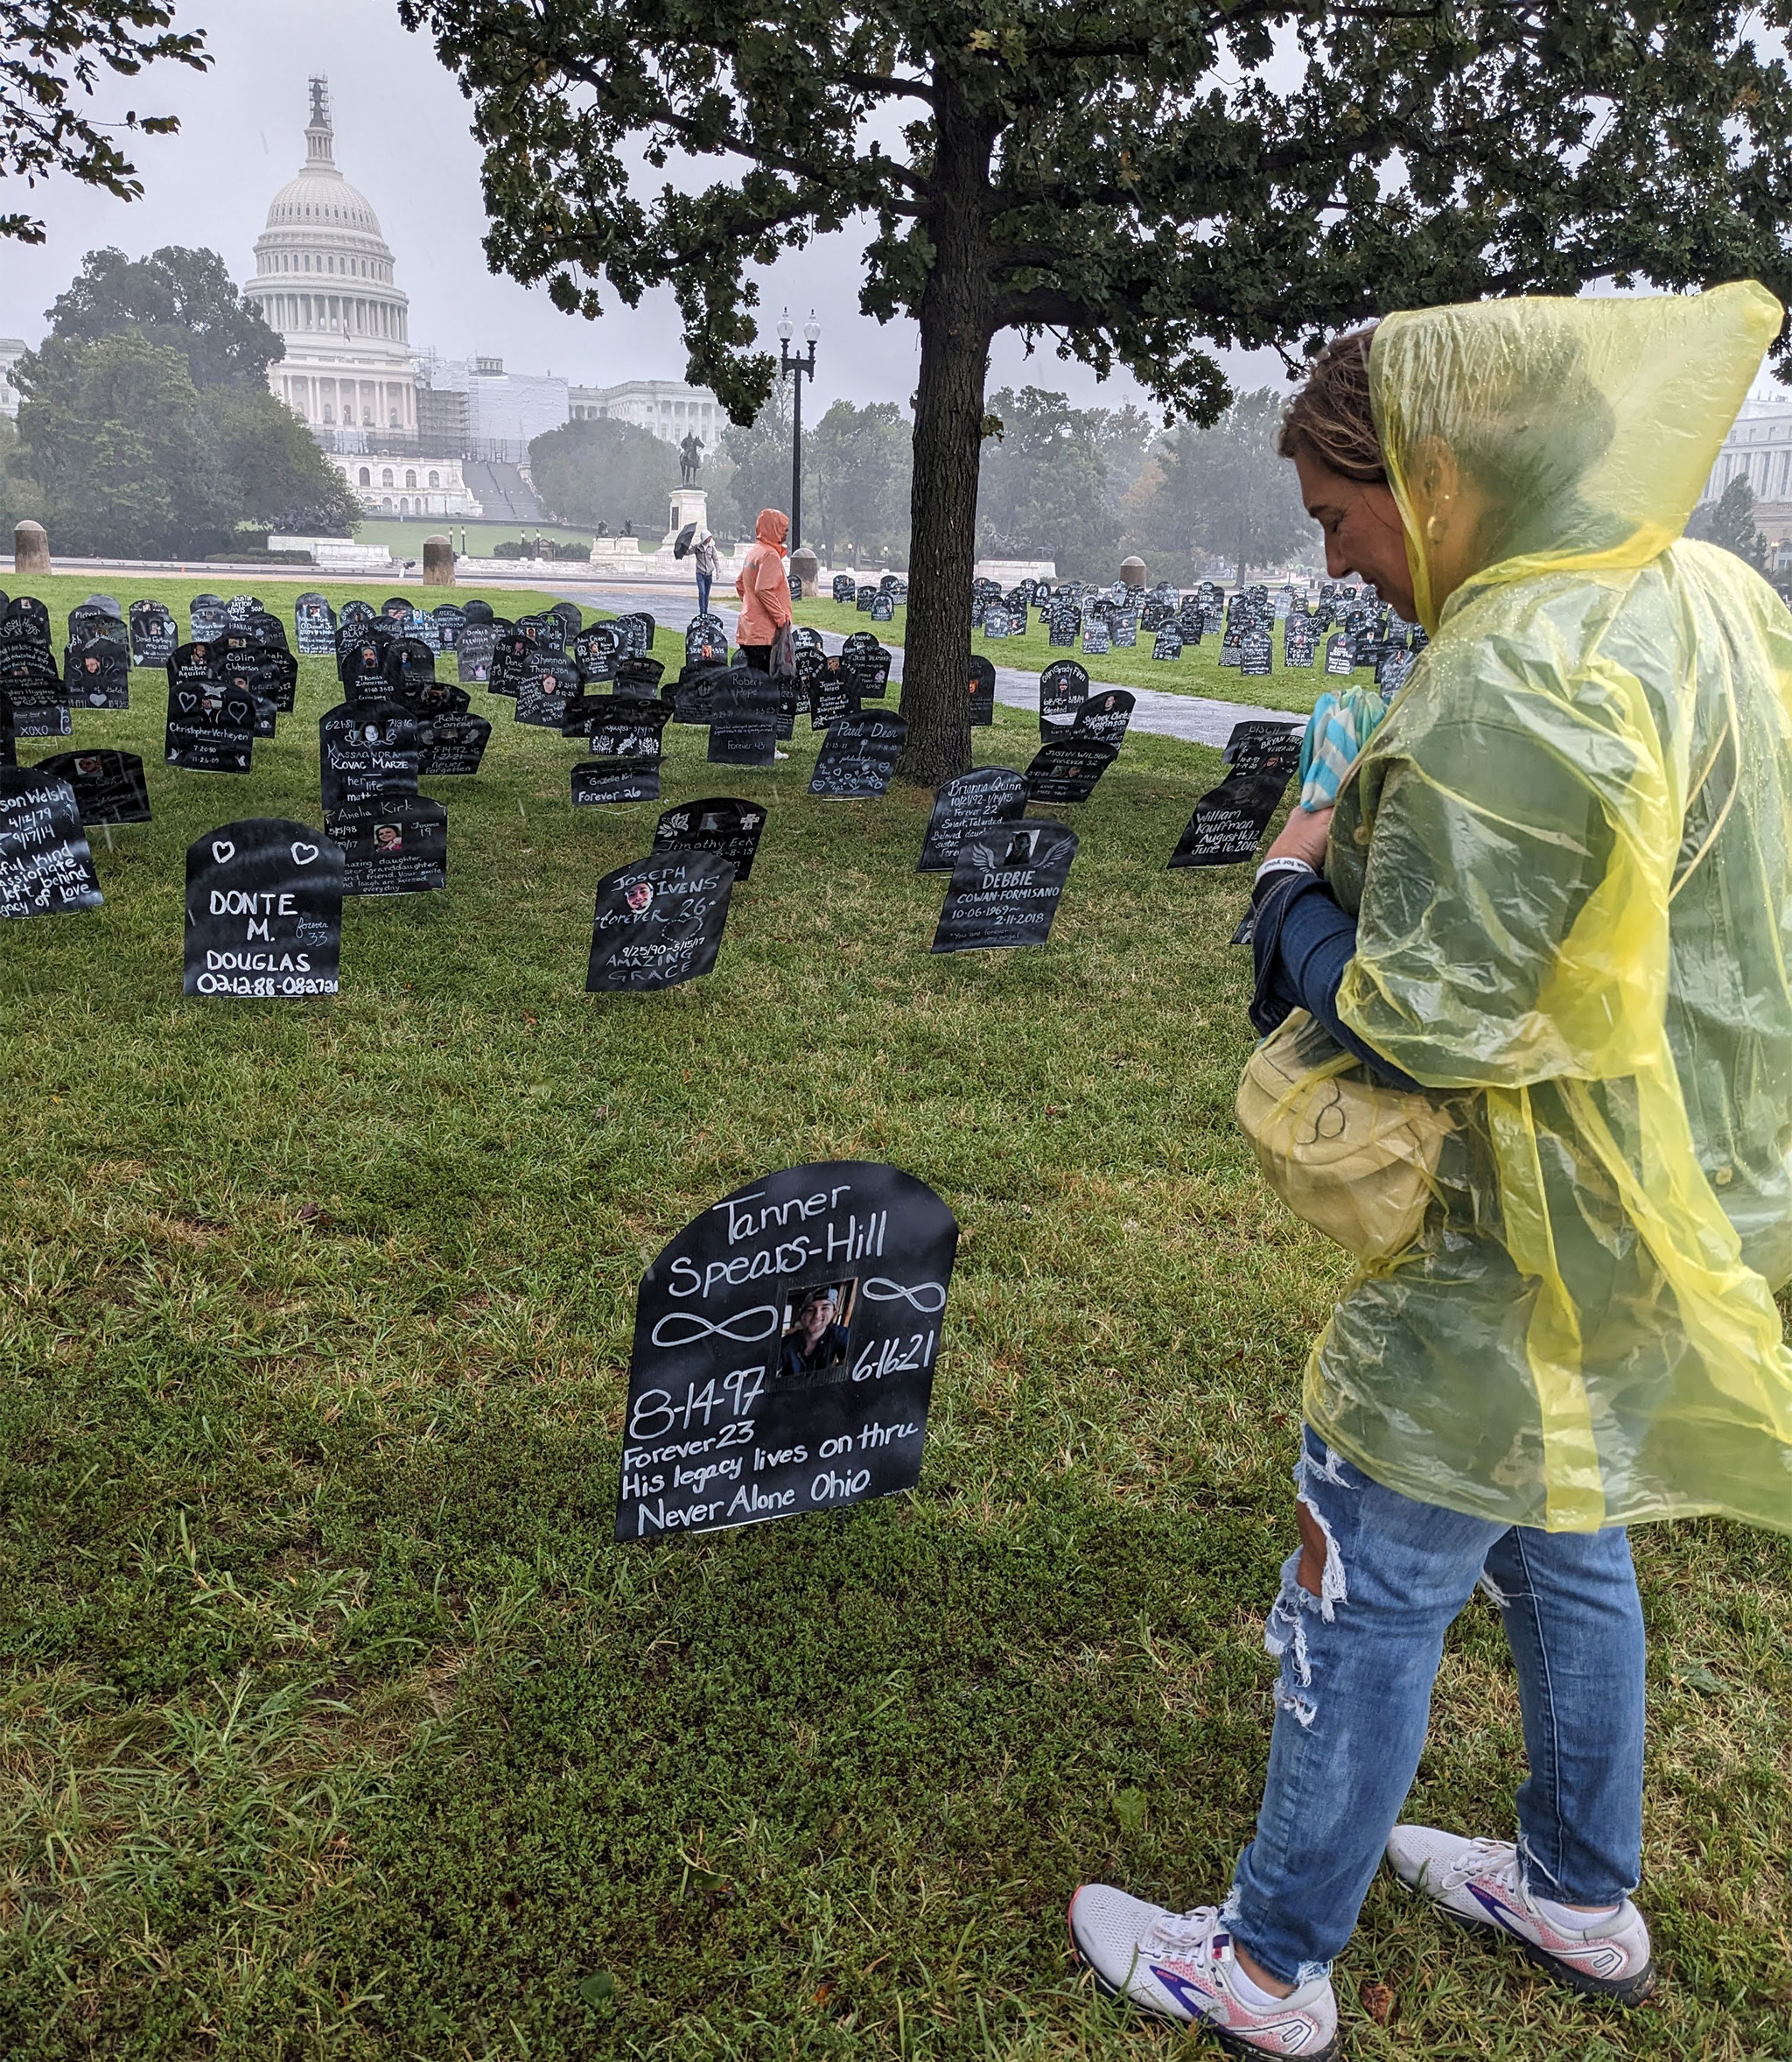 A woman wearing a transparent yellow rain jacket looks down at a sign stuck into the ground. There are dozens of similar markers in the background and the U.S. Capitol farther in the distance.